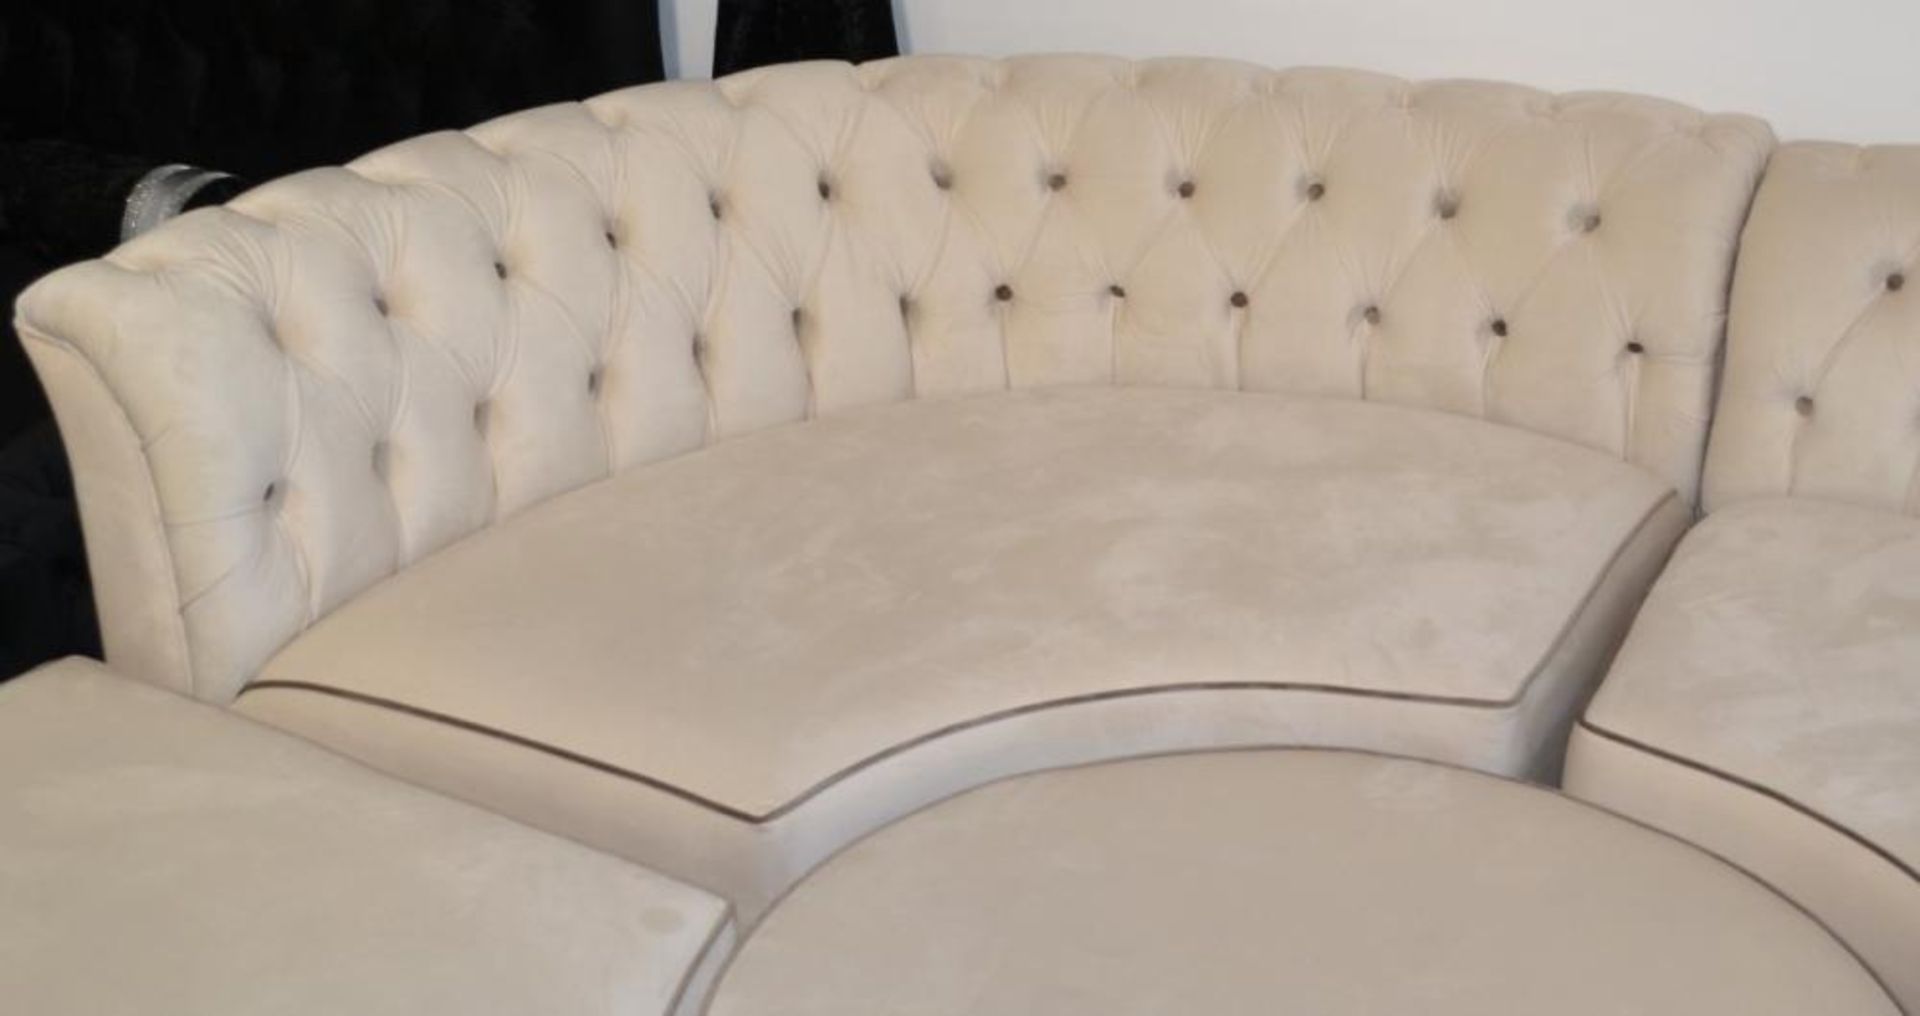 1 x Luxurious Bespoke Cream Velour 5 Piece Sofa Set. A truly beautiful bespoke piece that will give - Image 3 of 8